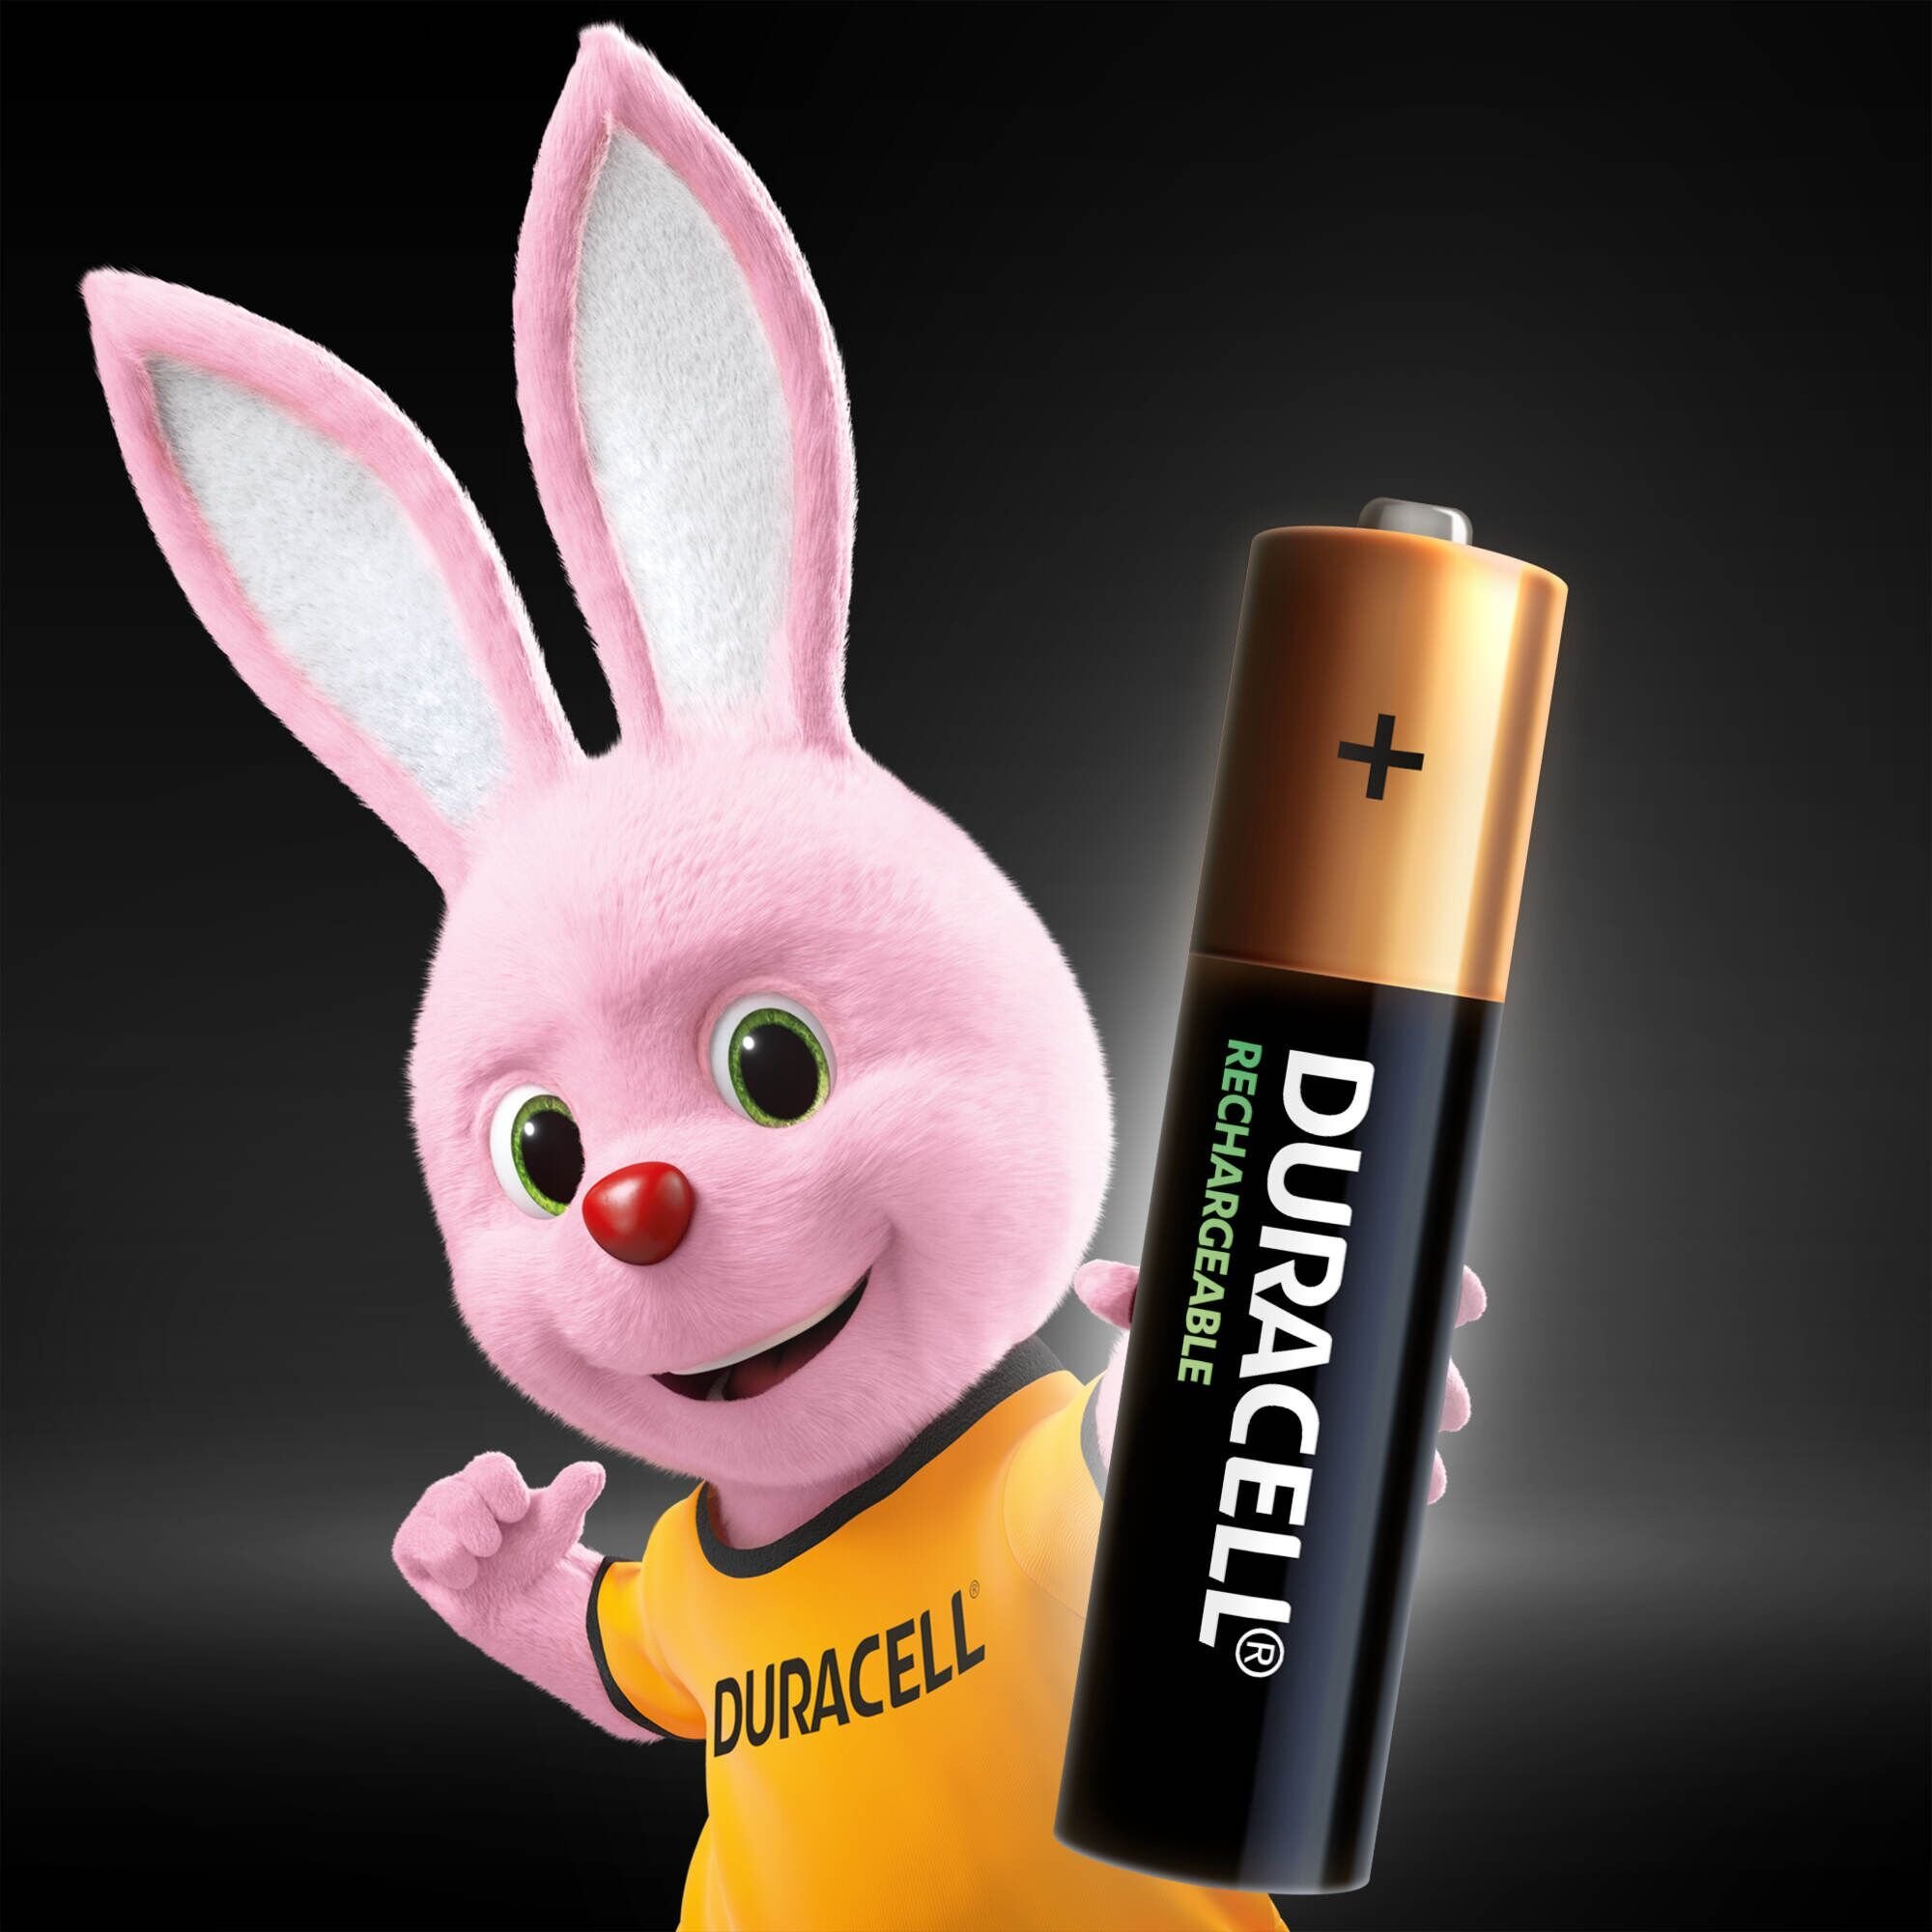 Акумулятори Duracell Rechargeable AAA 900 mAh HR03/DX2400, 4 шт. (5005015) - фото 3